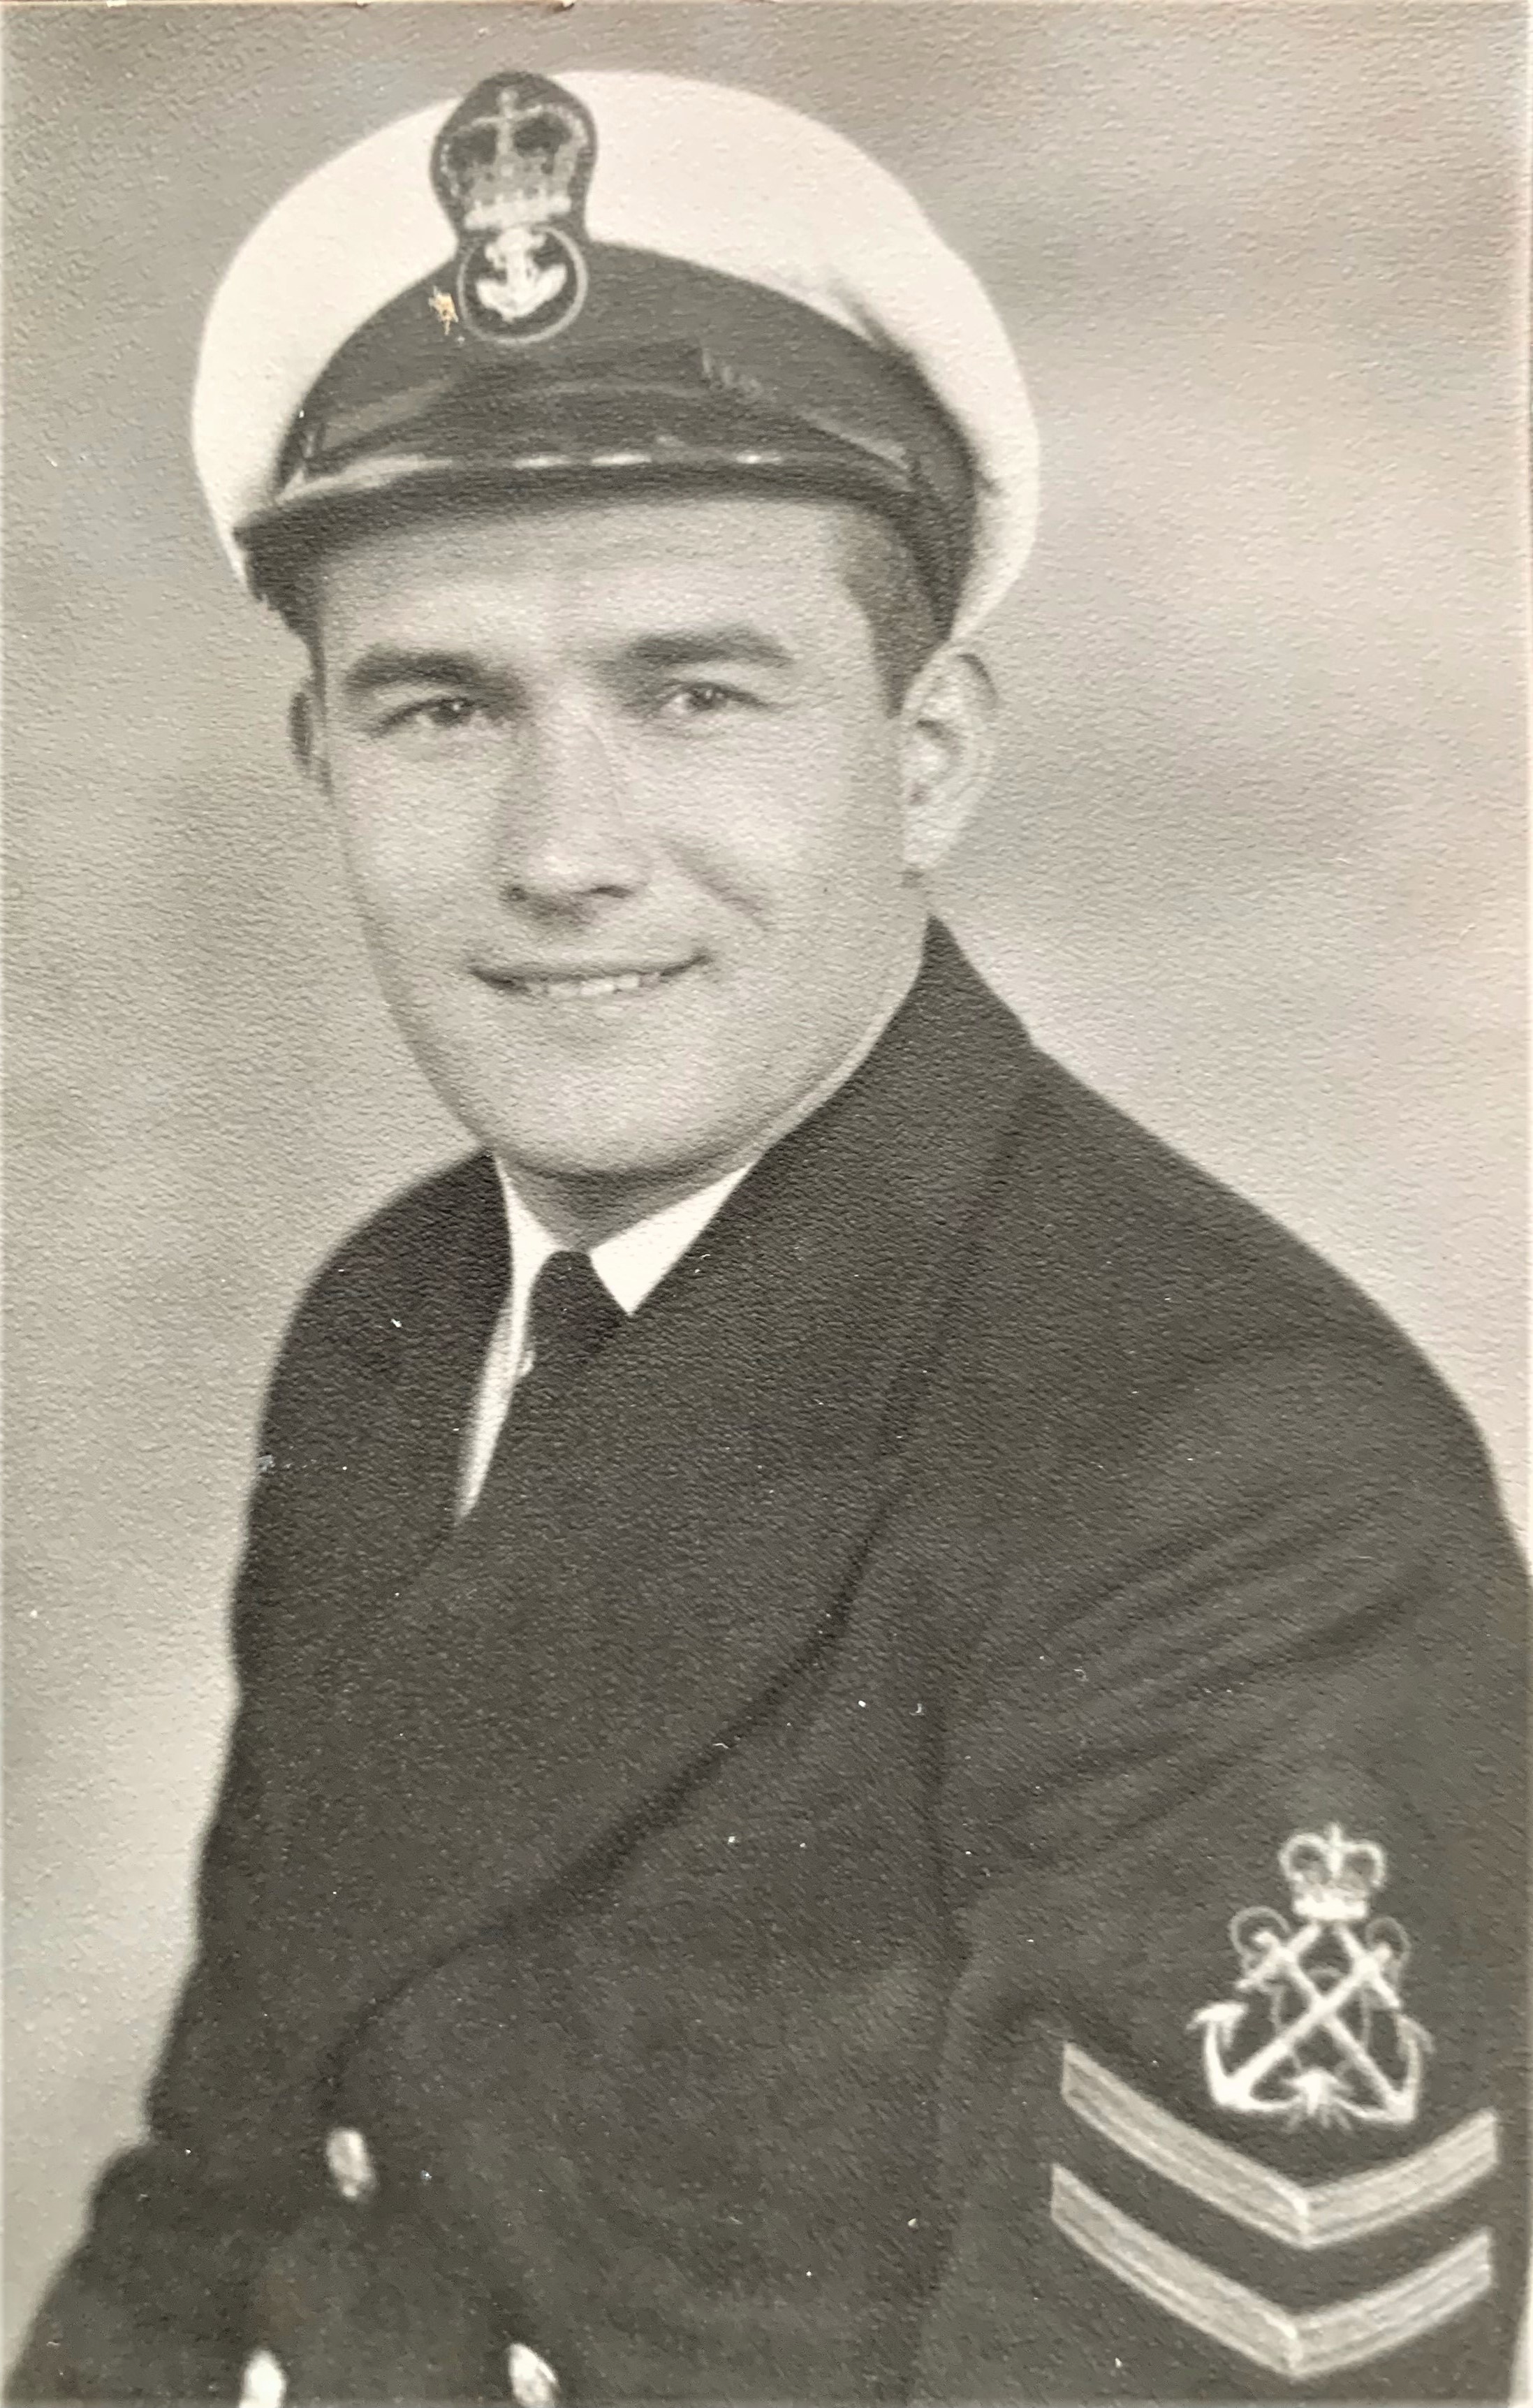 Denley Isaac as a Chief Petty Officer with the Submarine Service.